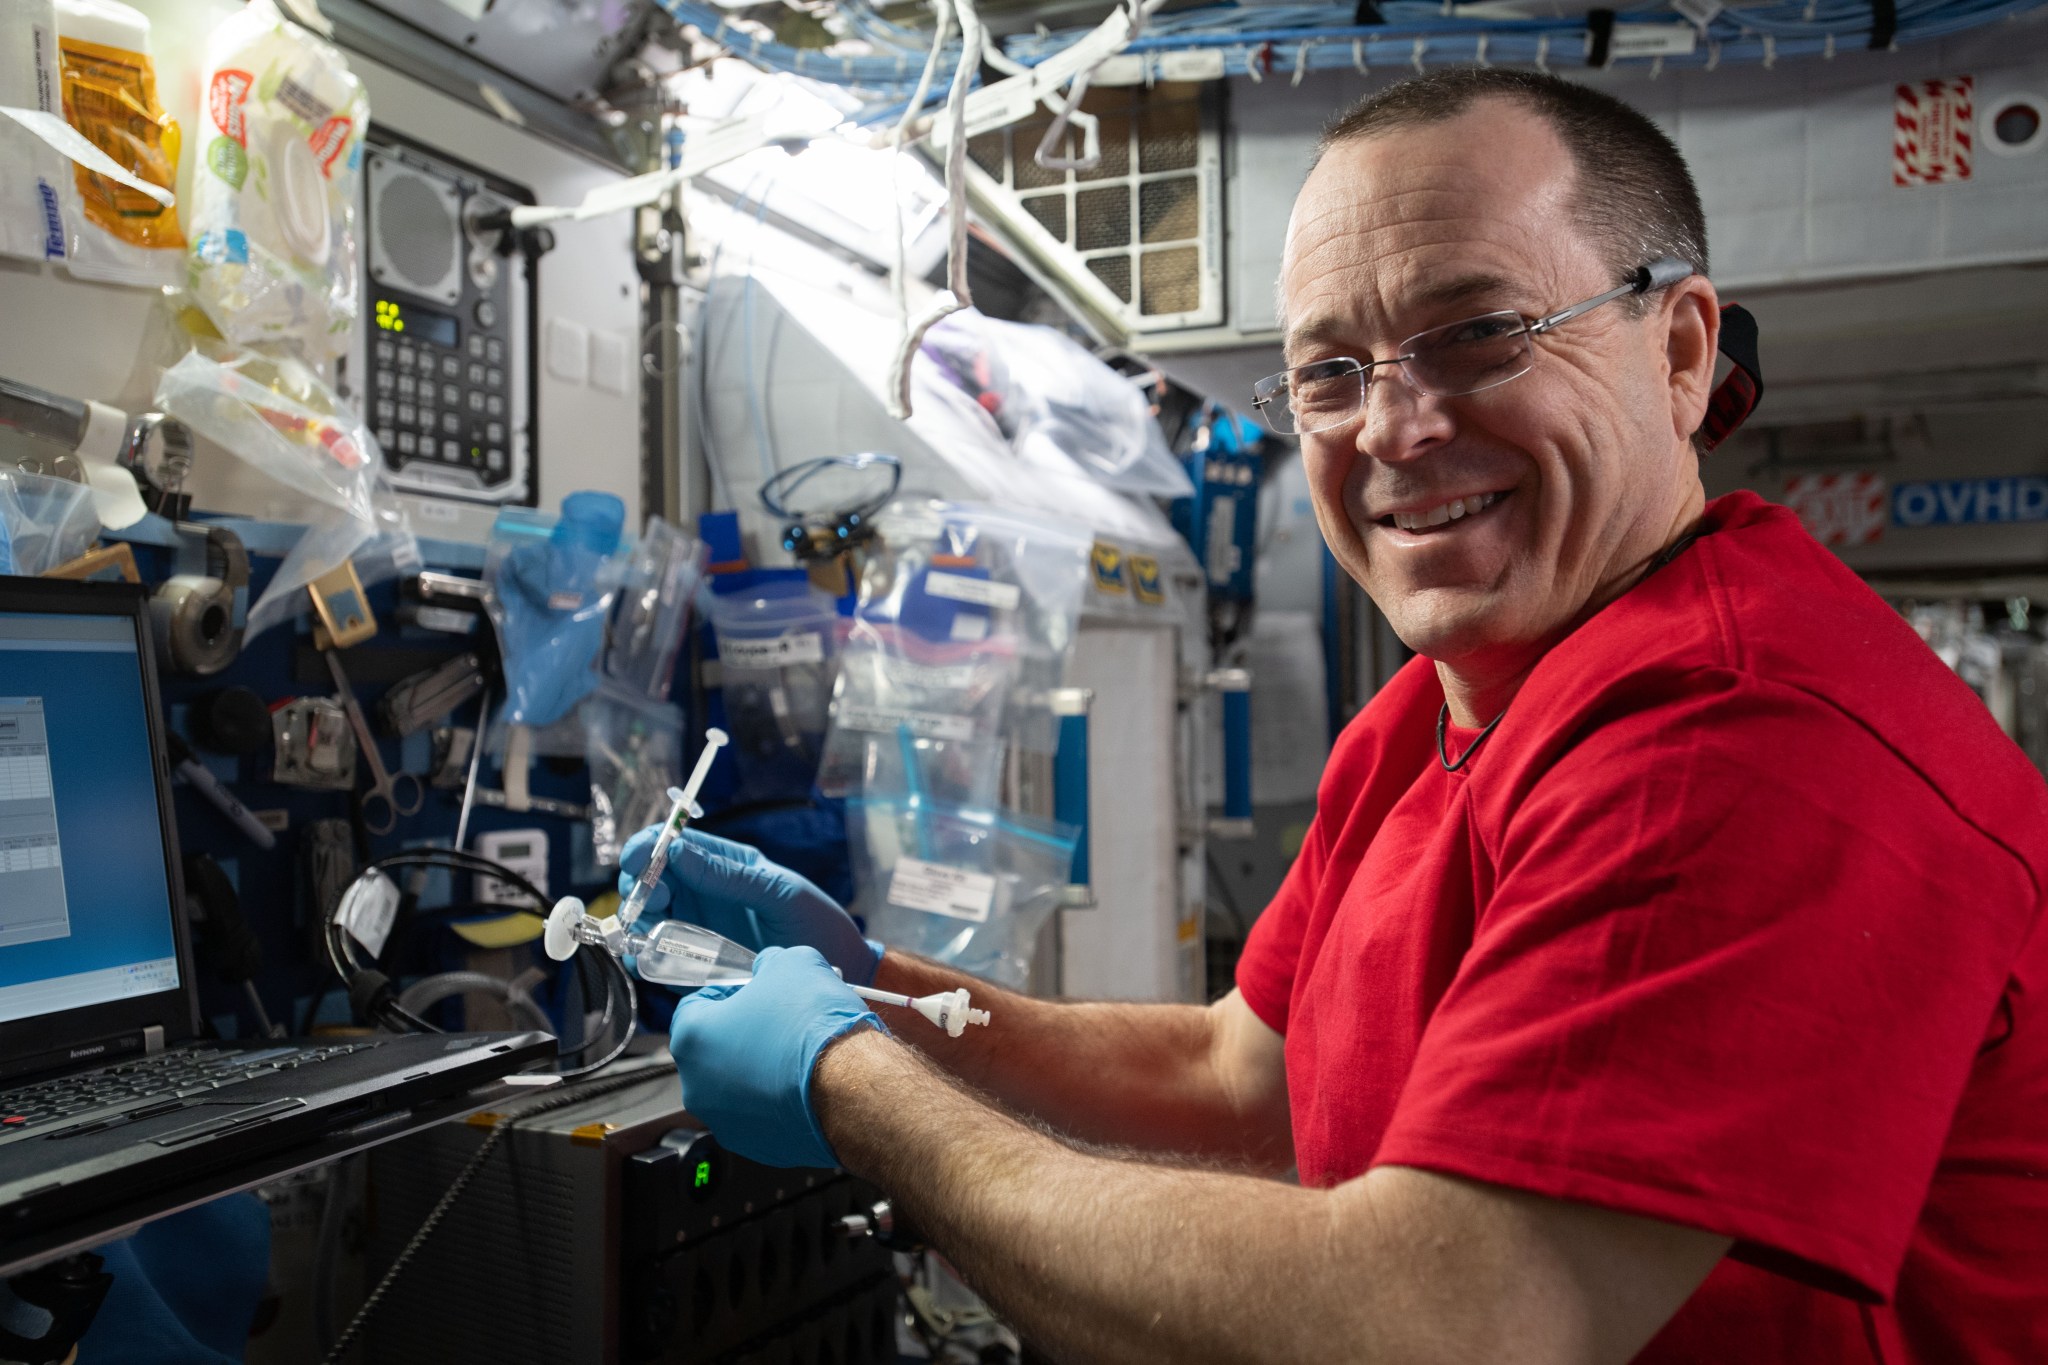 Astronaut Ricky Arnold works to extract RNA from biological samples